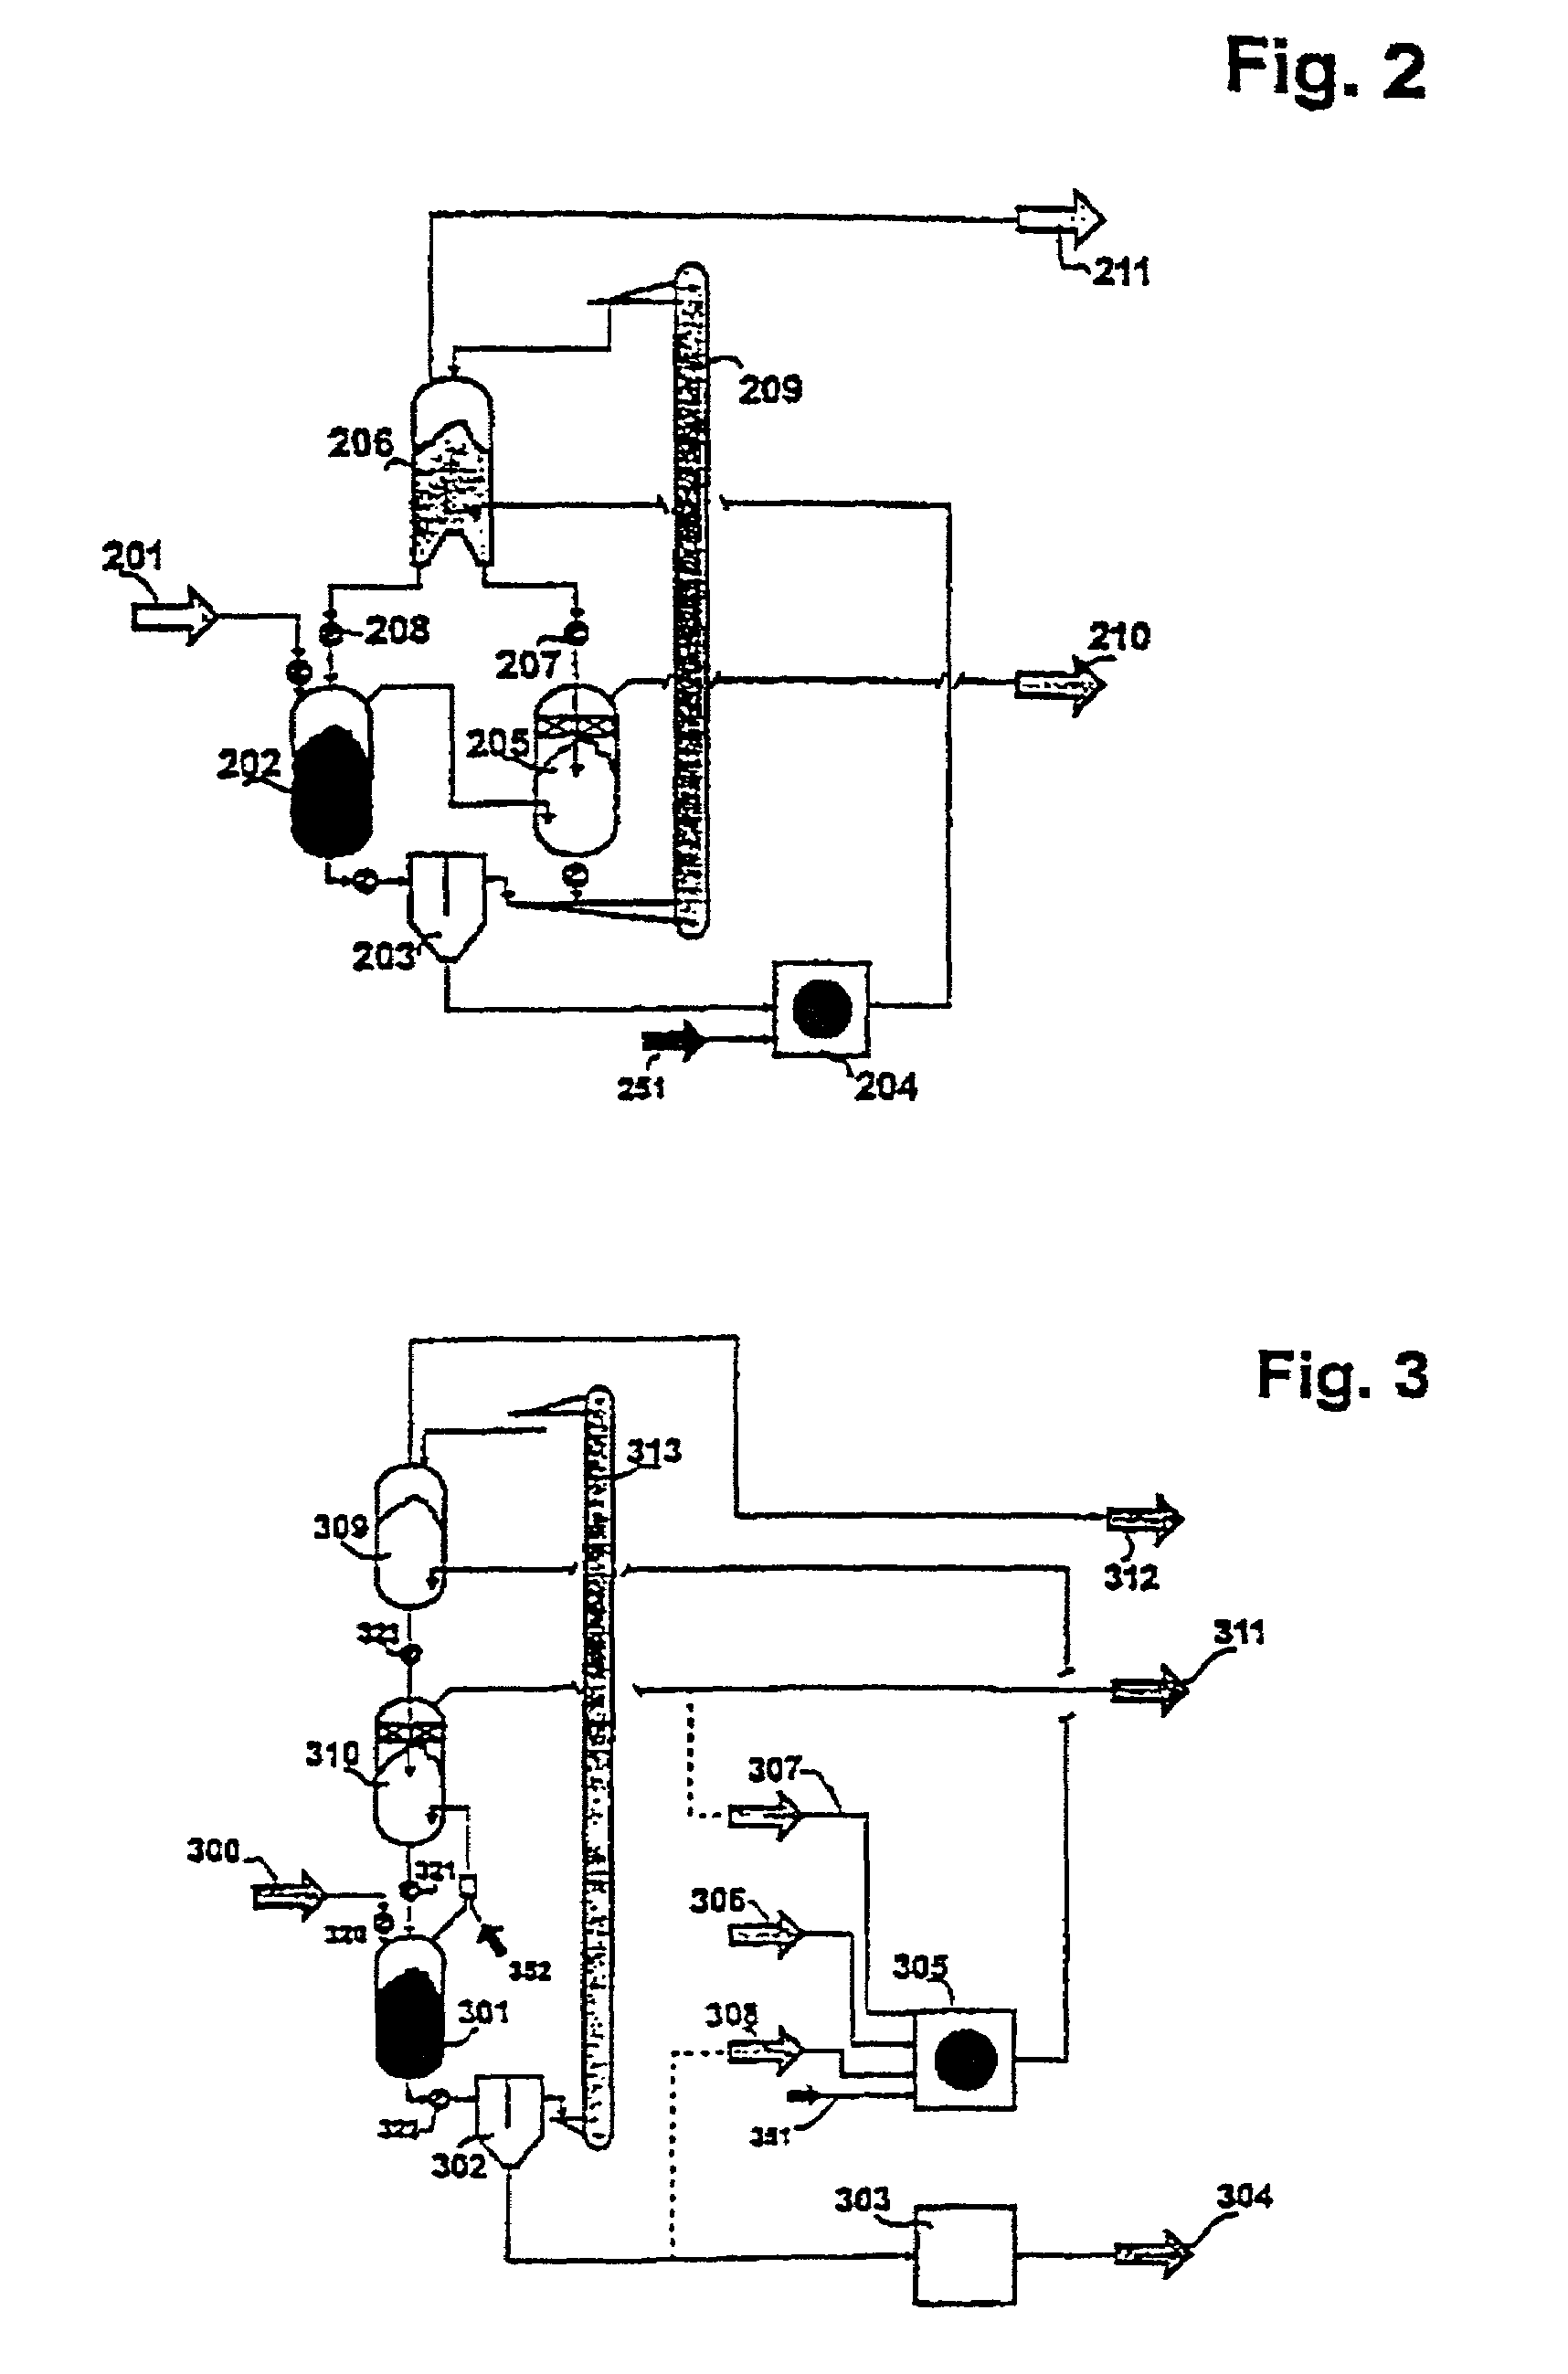 Method for gasifying organic materials and mixtures of materials